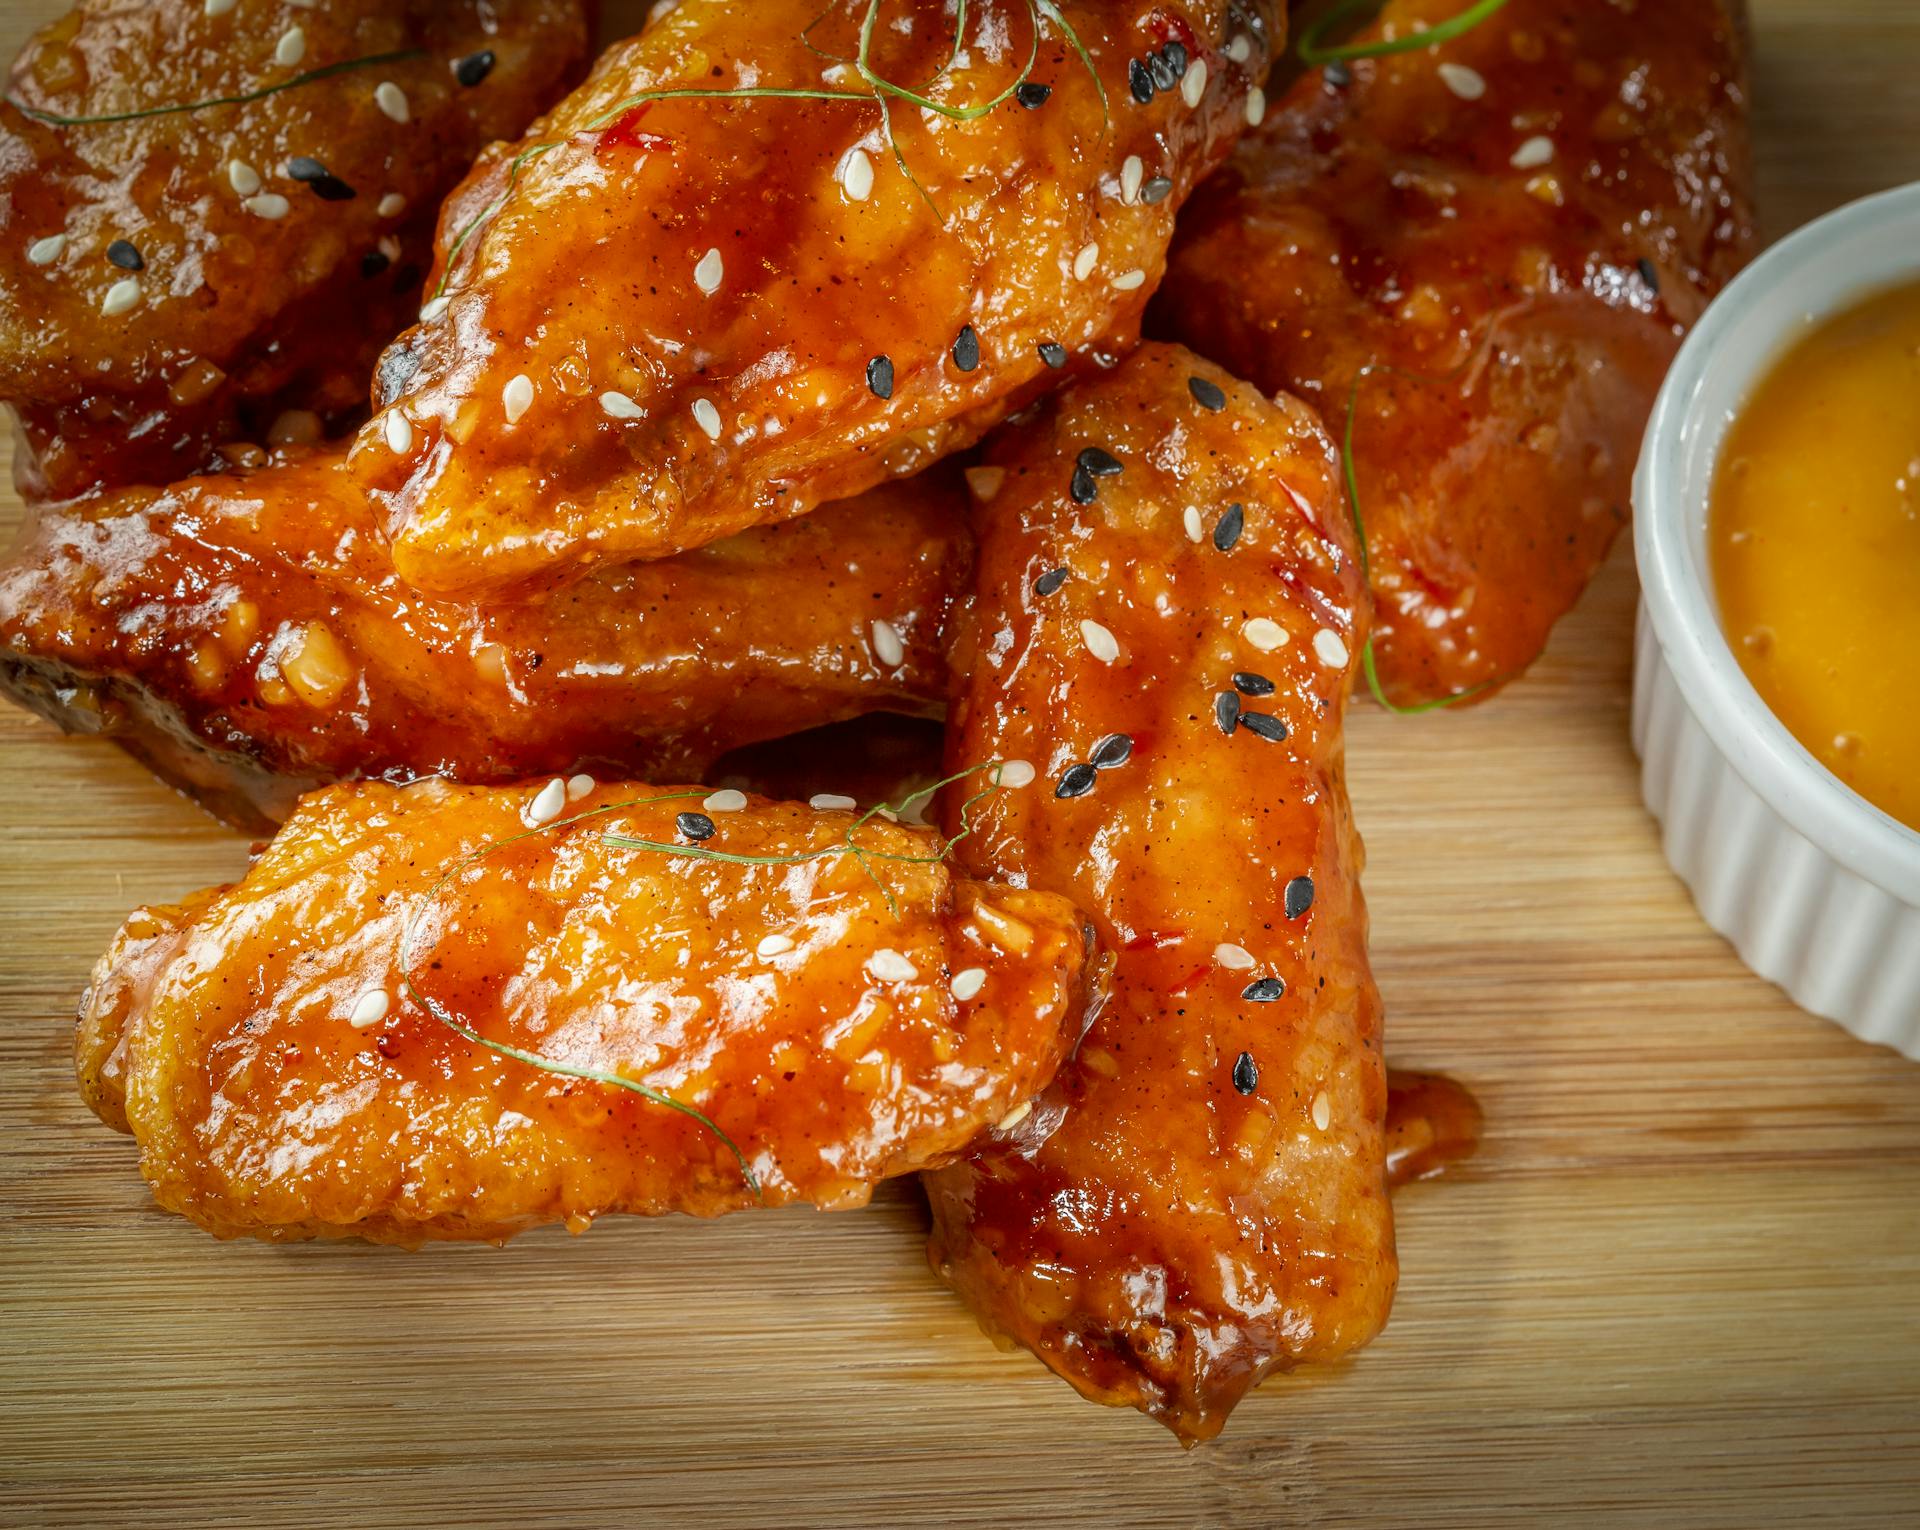 Fried wings with sauce | Source: Pexels